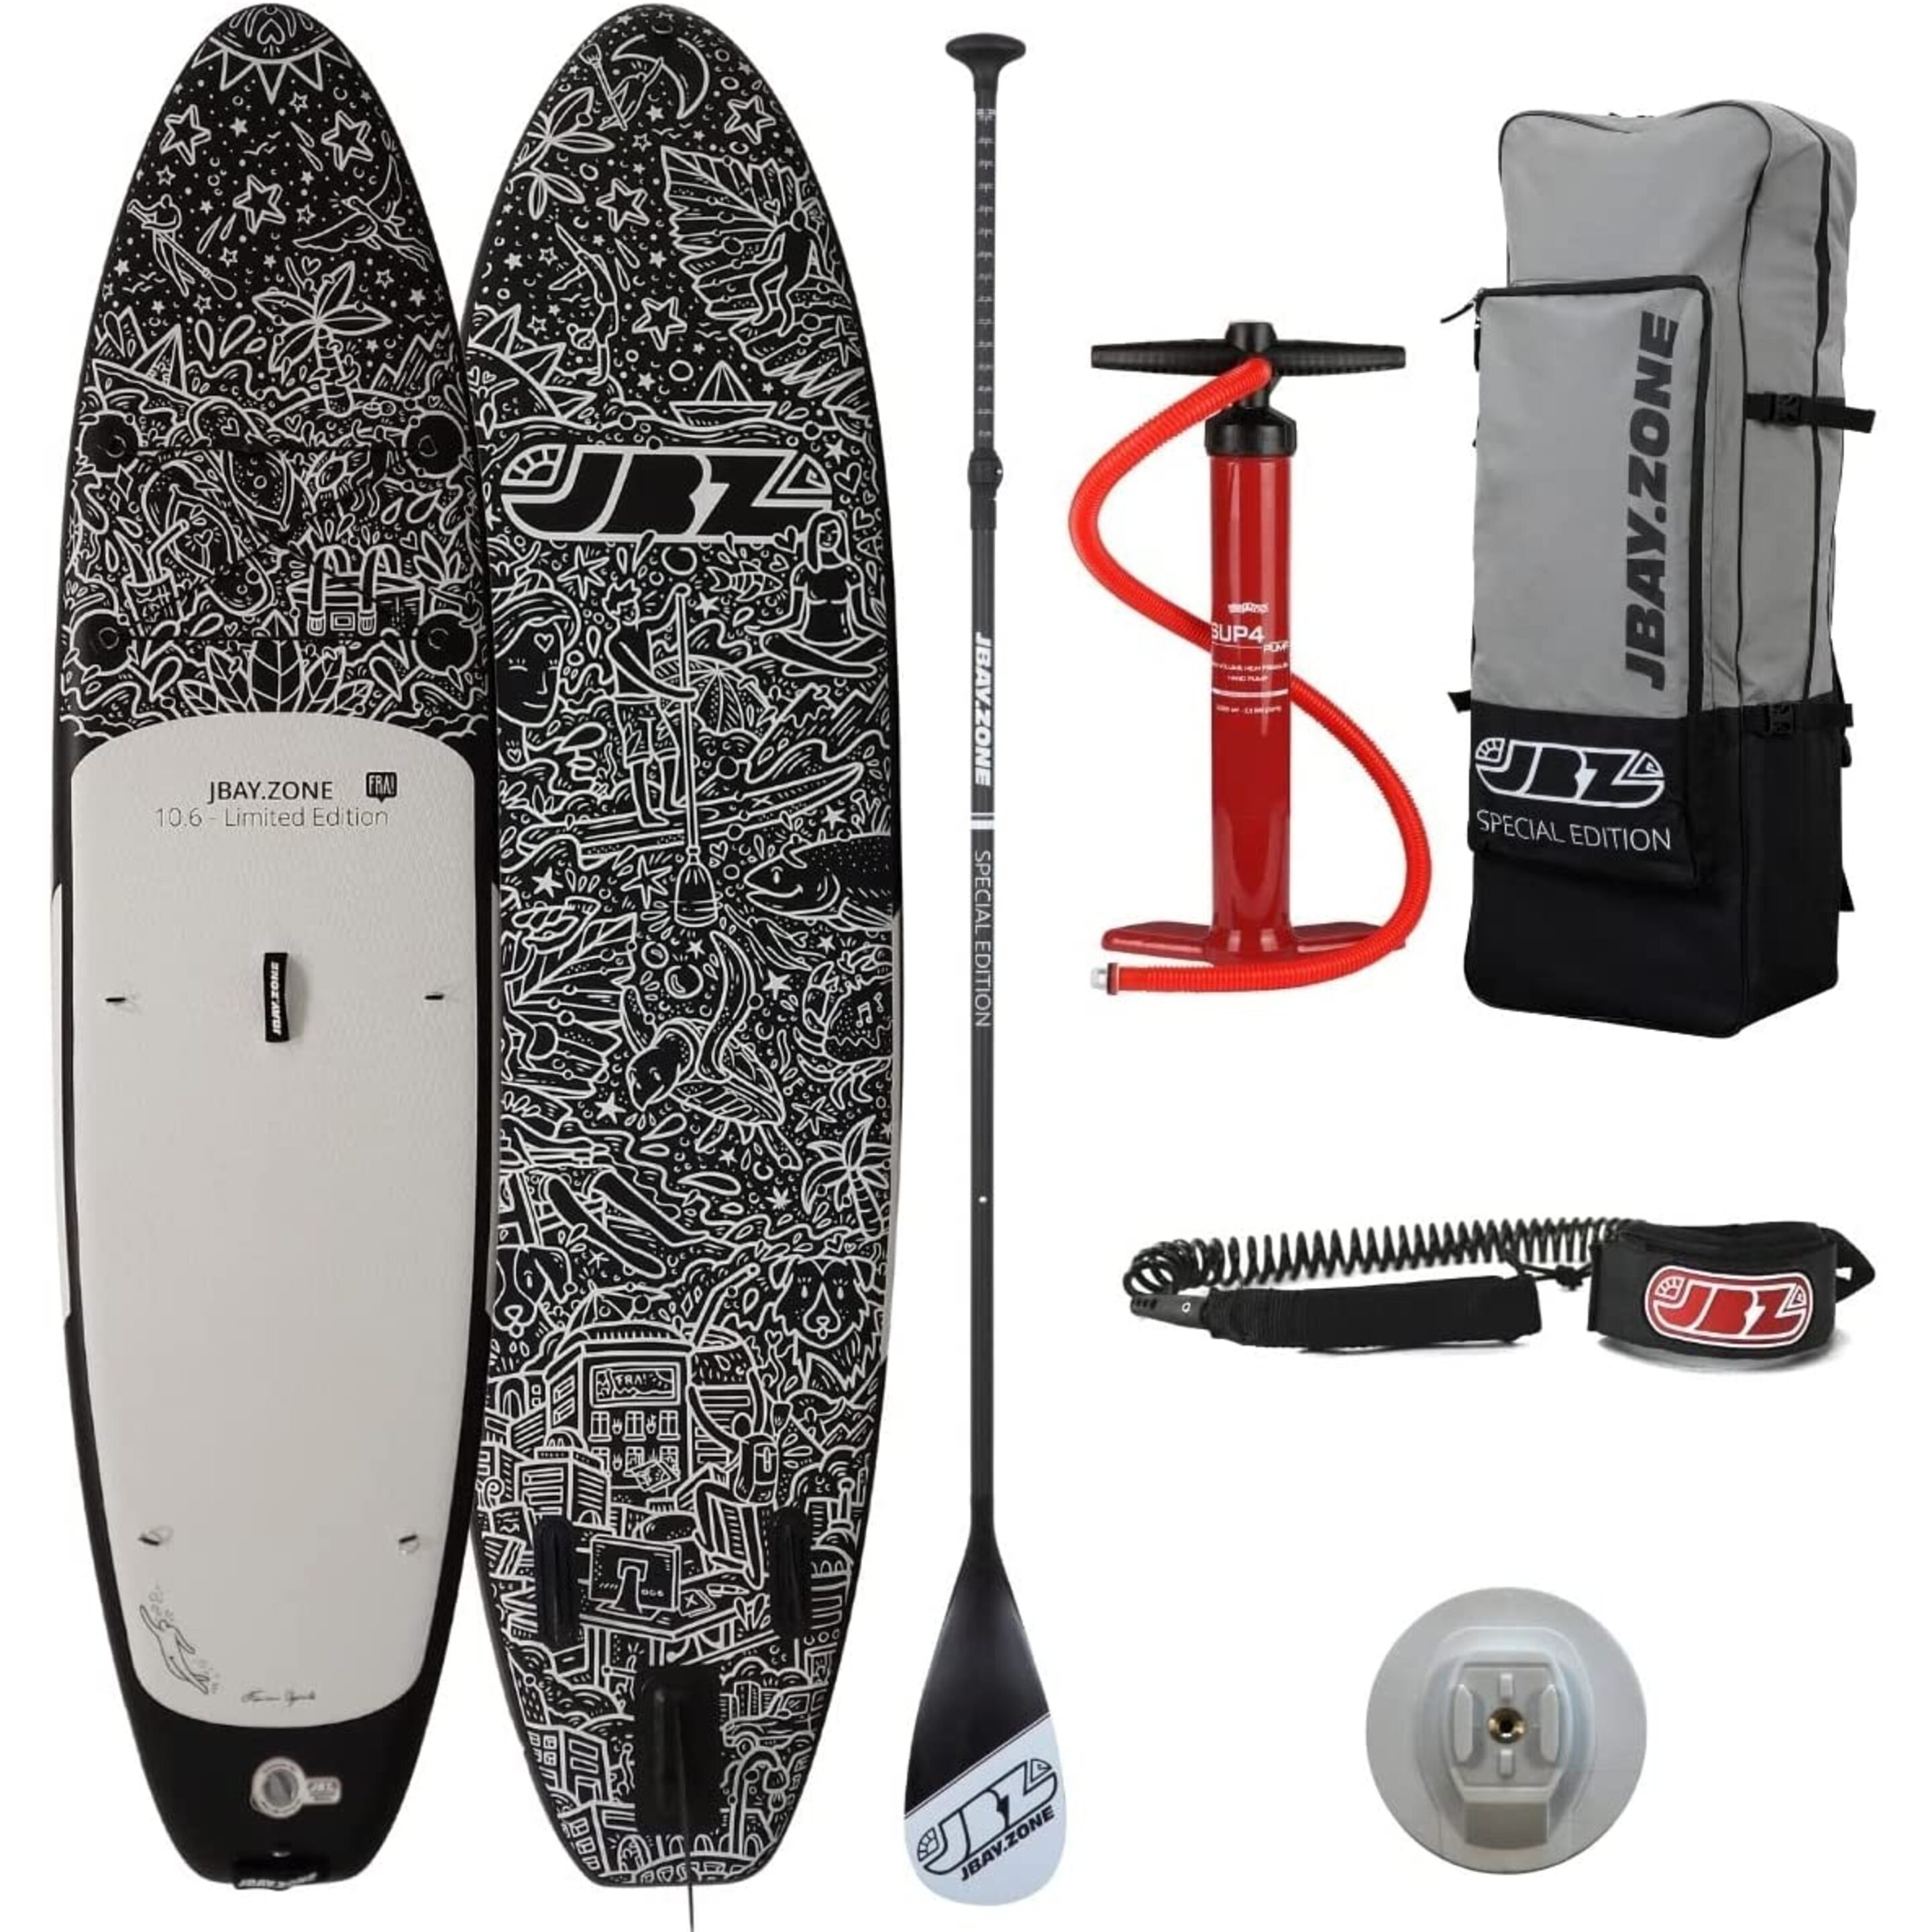 Tabla De Stand Up Paddle Surf Sup Hinchable Jbay.zone Fra! Special Edition